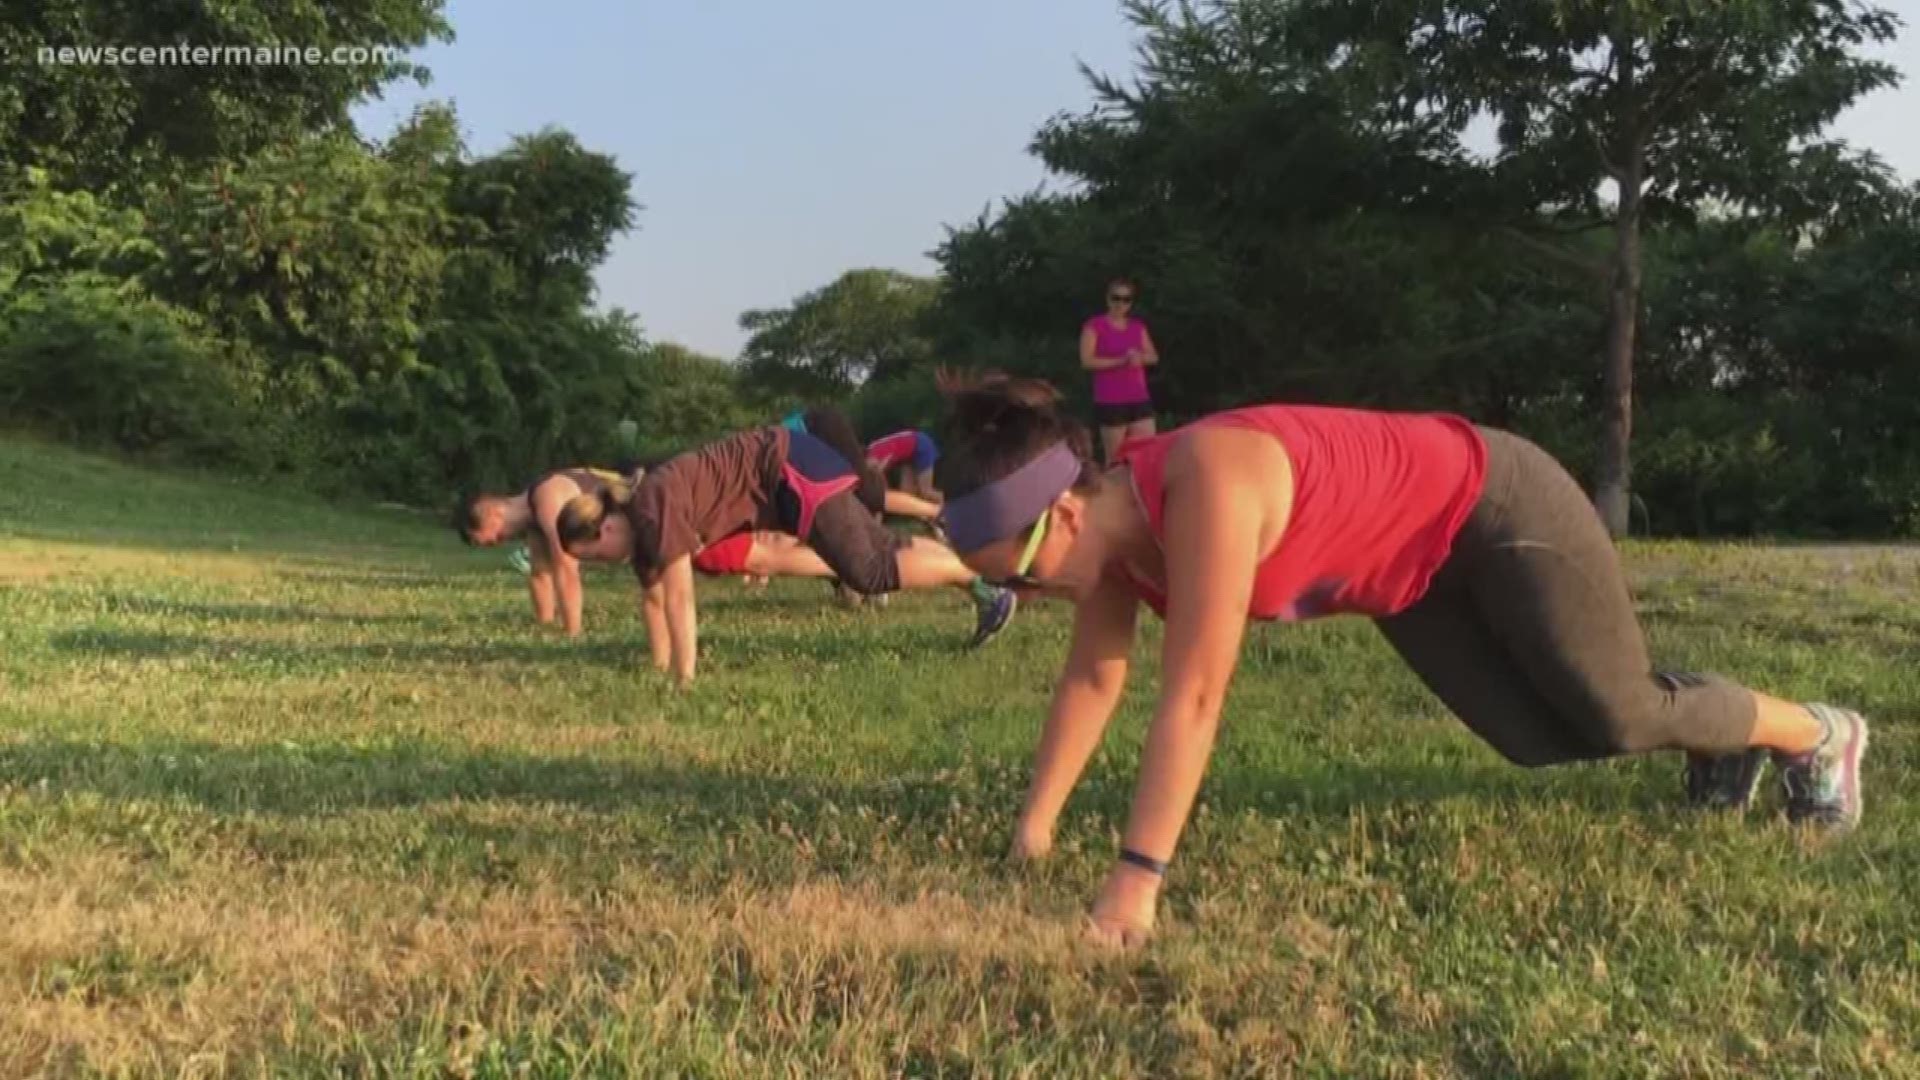 From full moon paddles to boot camp in the grass, Shannon Bryan with FitMaine.com has her picks for working out outside.